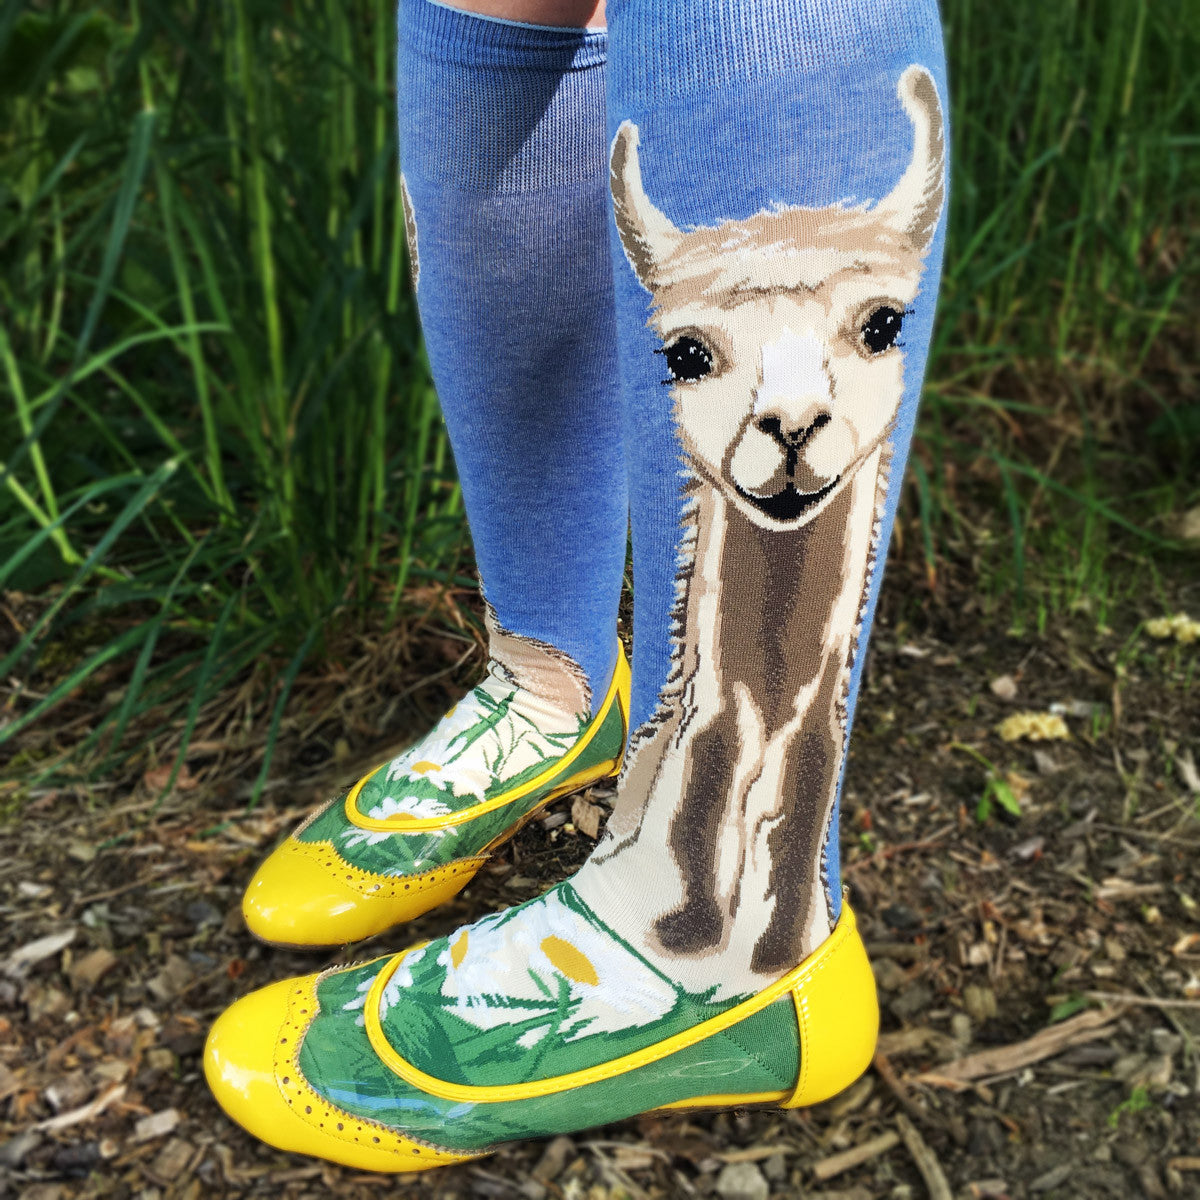 A cute llama adorns this blue and green animal-themed knee-sock style by ModSocks, worn here with bright yellow flats.